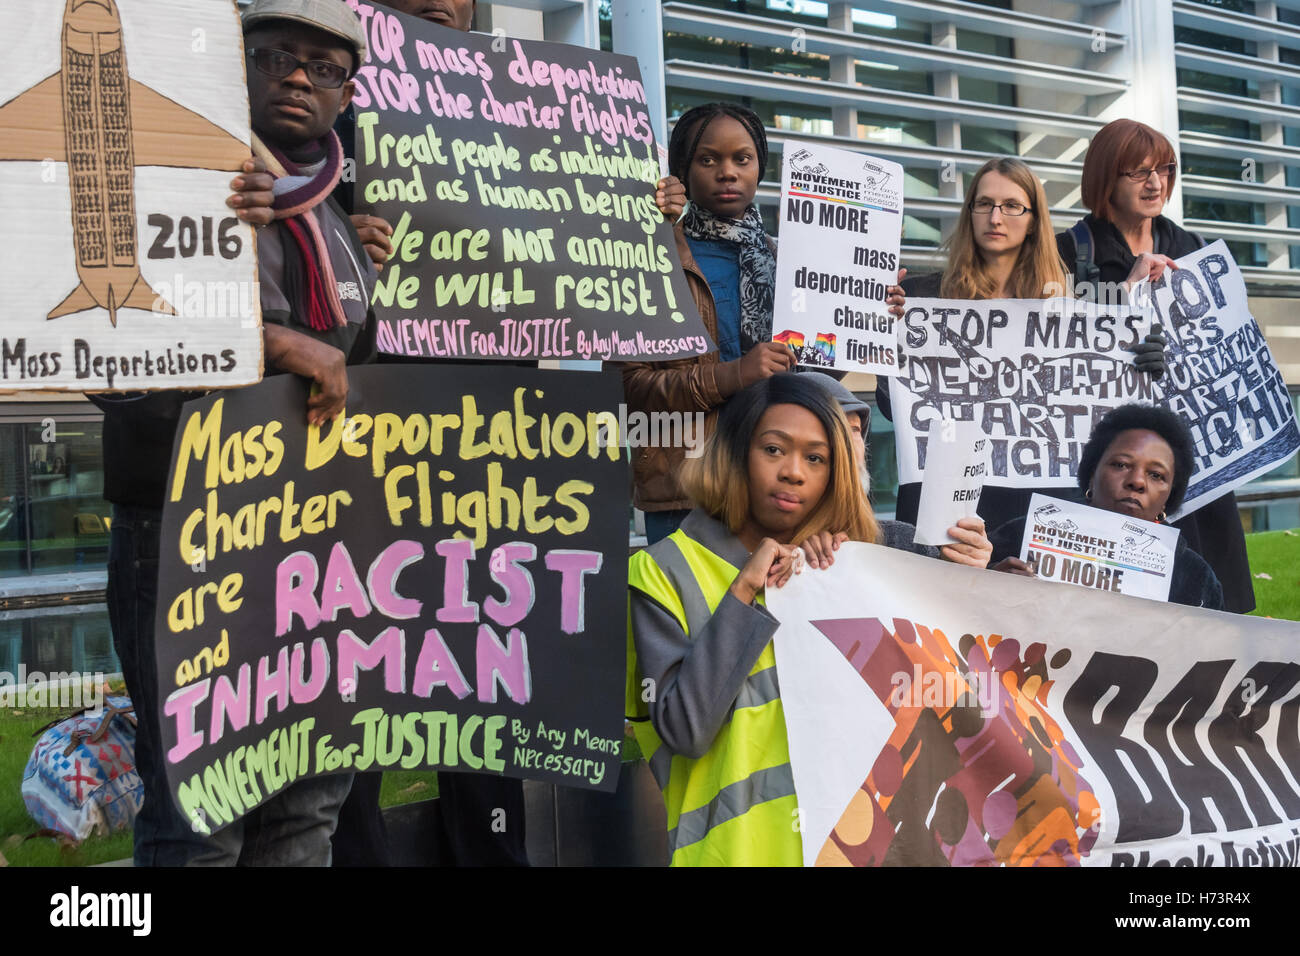 London, UK. 2nd November 2016. BARAC UK, Movement for Justice and other campaigners were at the Home Office to demand an end to forcible mass deportations such as the flight in September which took 42 people to Jamaica, many who had lived in the UK for decades and have partners, spouses, children and grandchildren here and some who were in process of becoming naturalised or appealing deportation. Peter Marshall/Alamy Live News Stock Photo